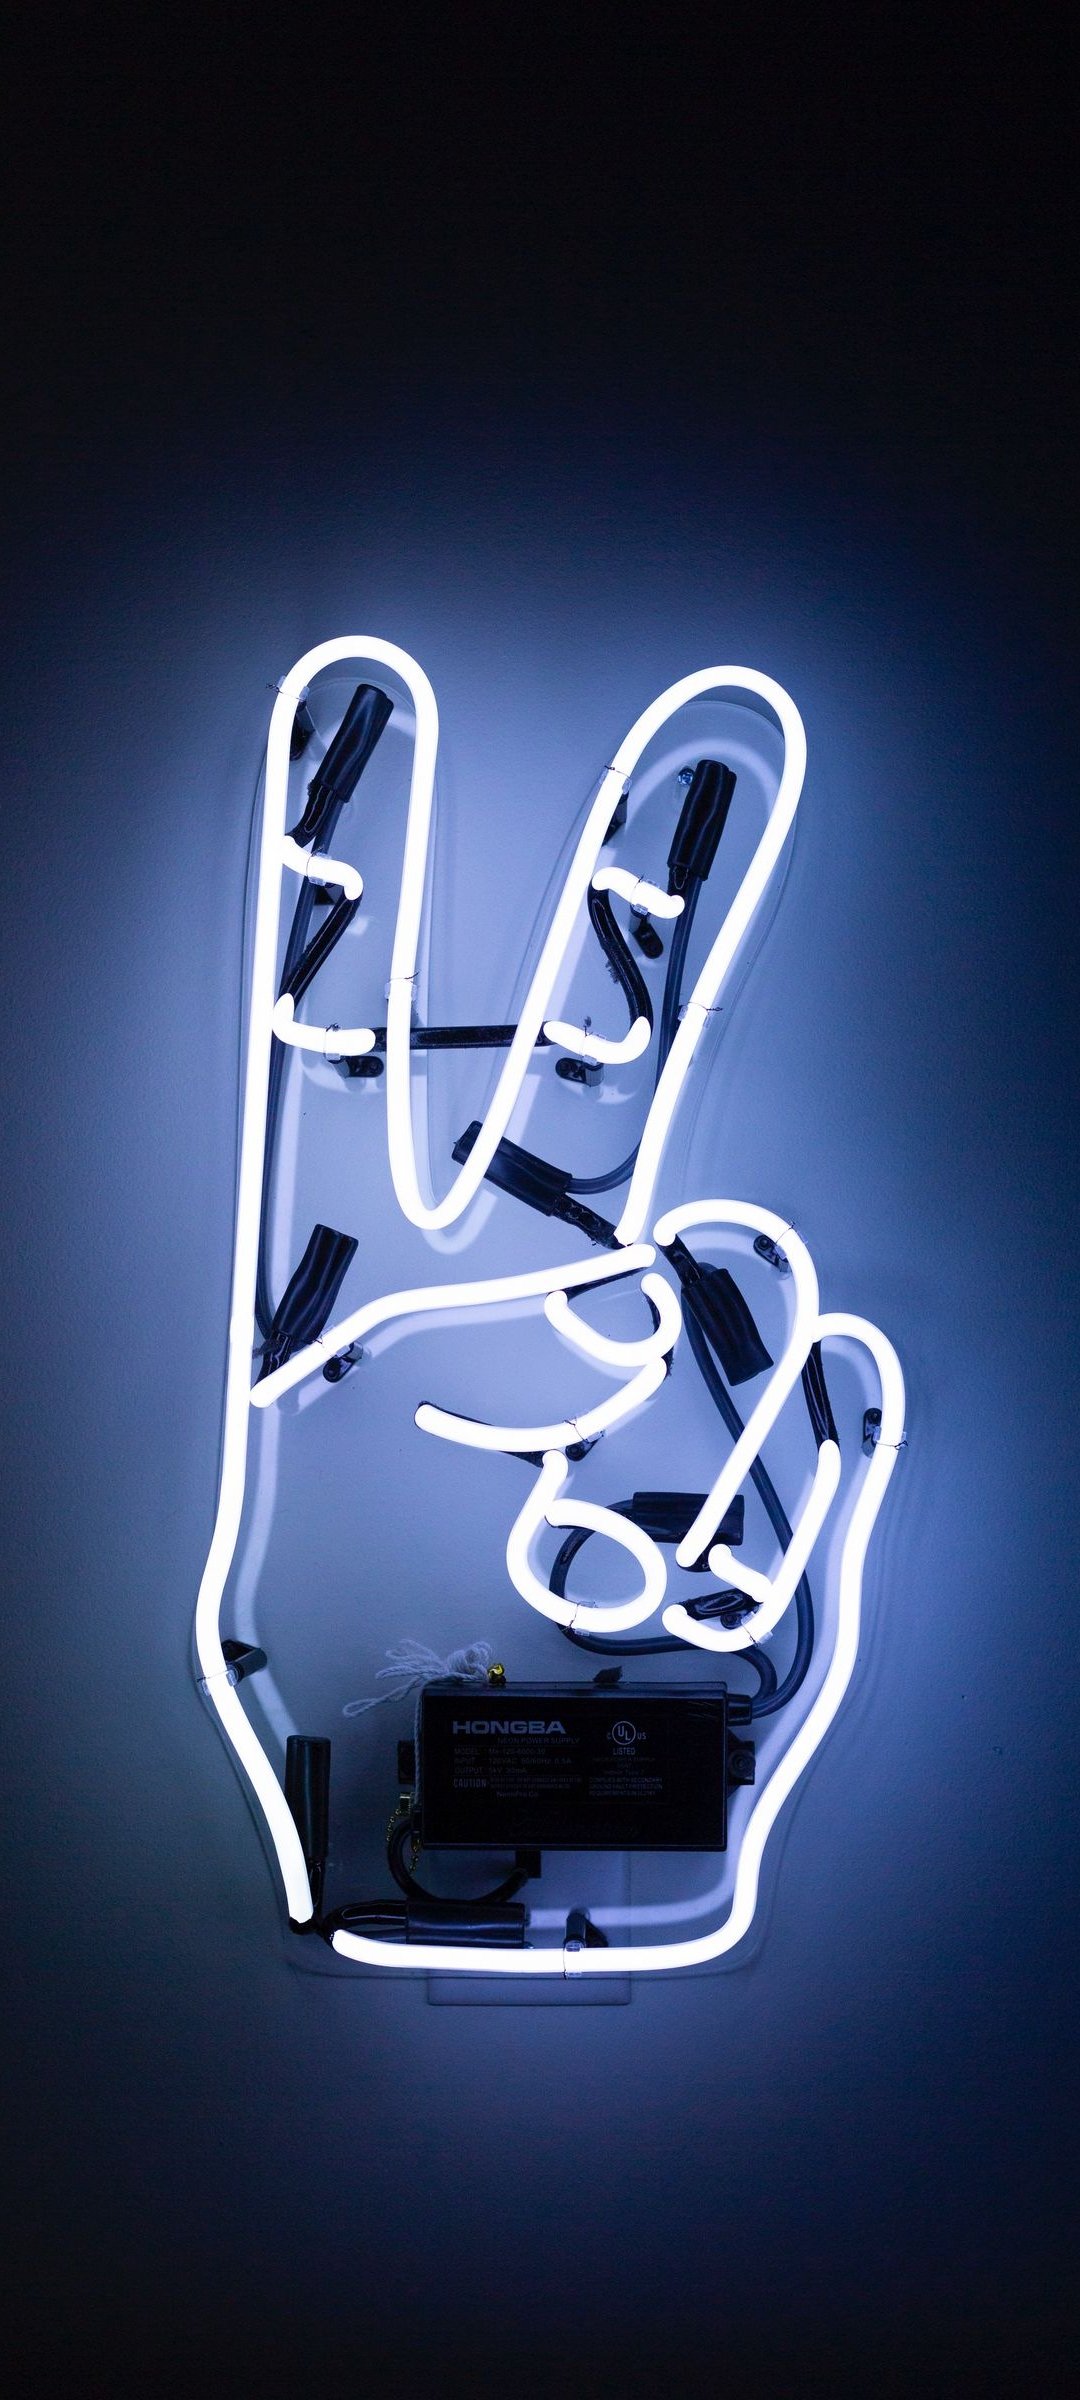 A neon sign with the peace symbol - Peace